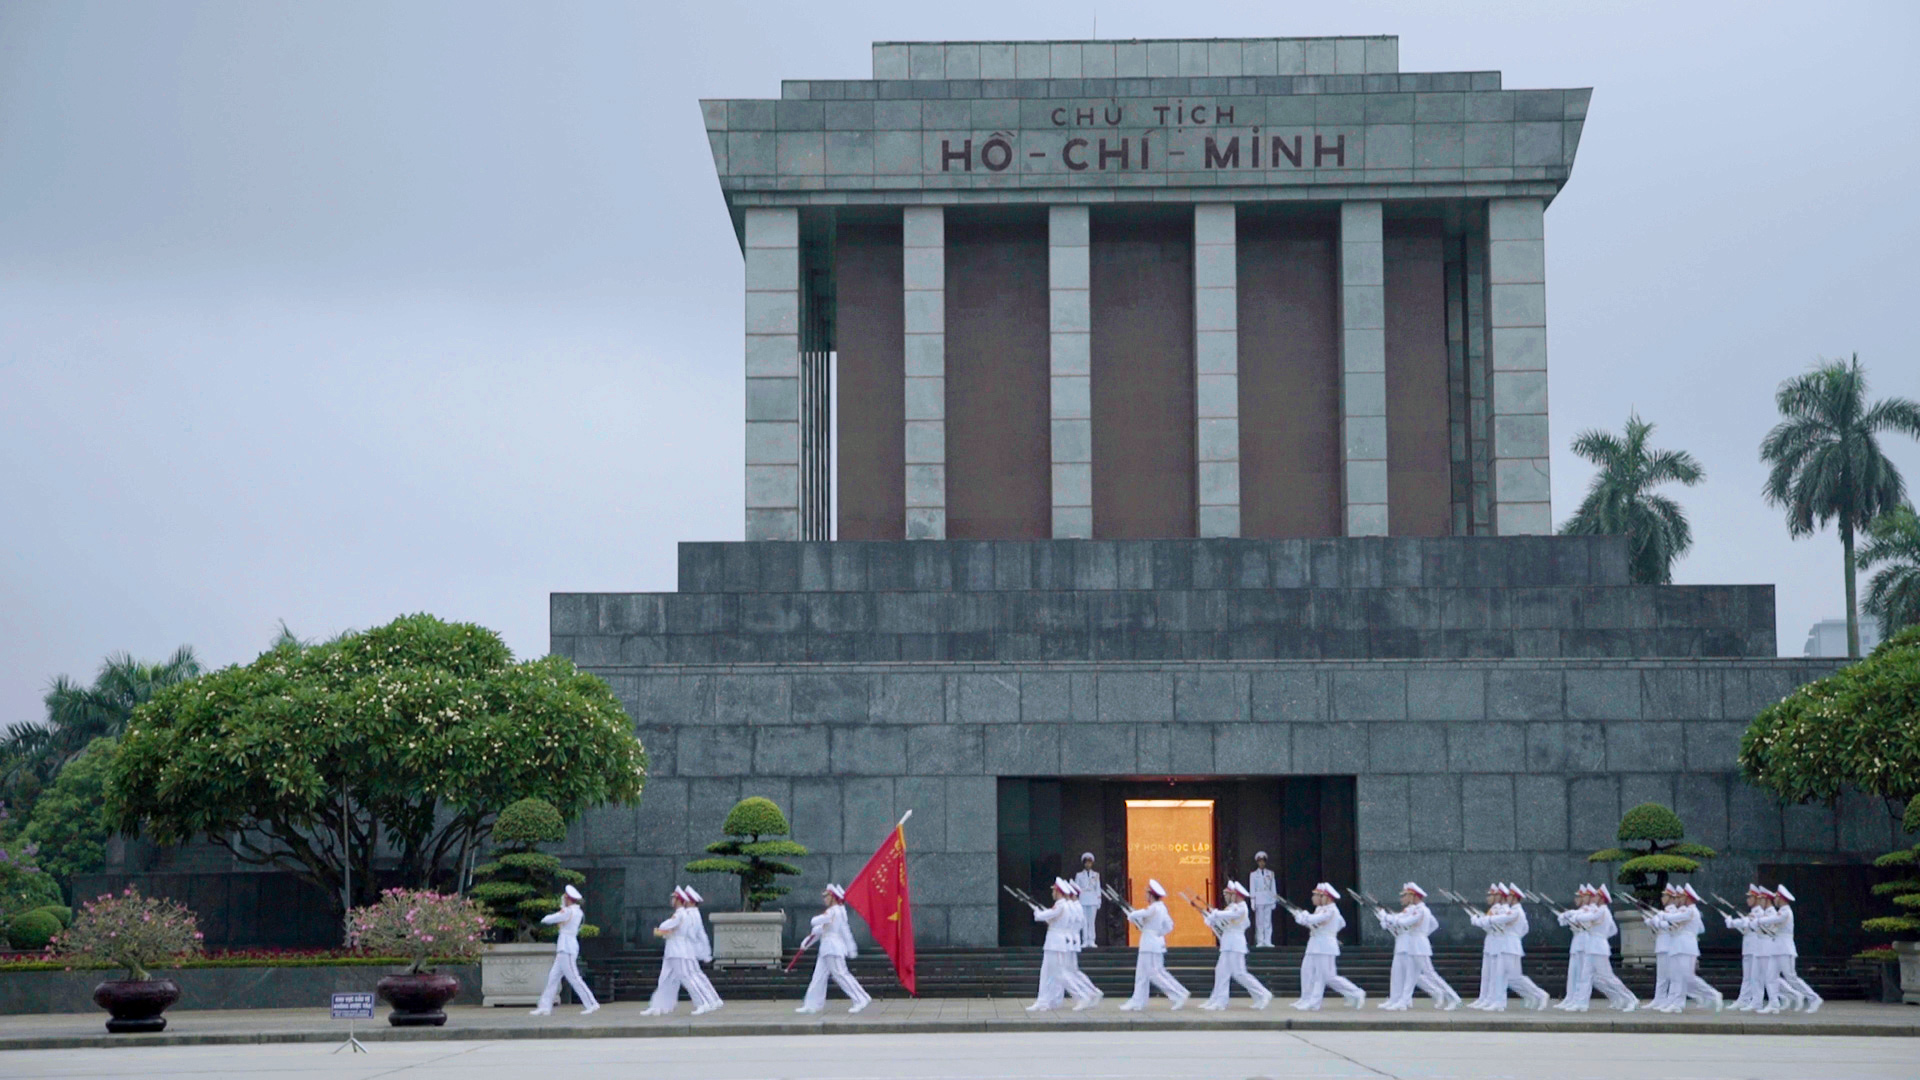 Ho Chi Minh Mausoleum: How to visit the sacred site in Vietnam | CNN Travel